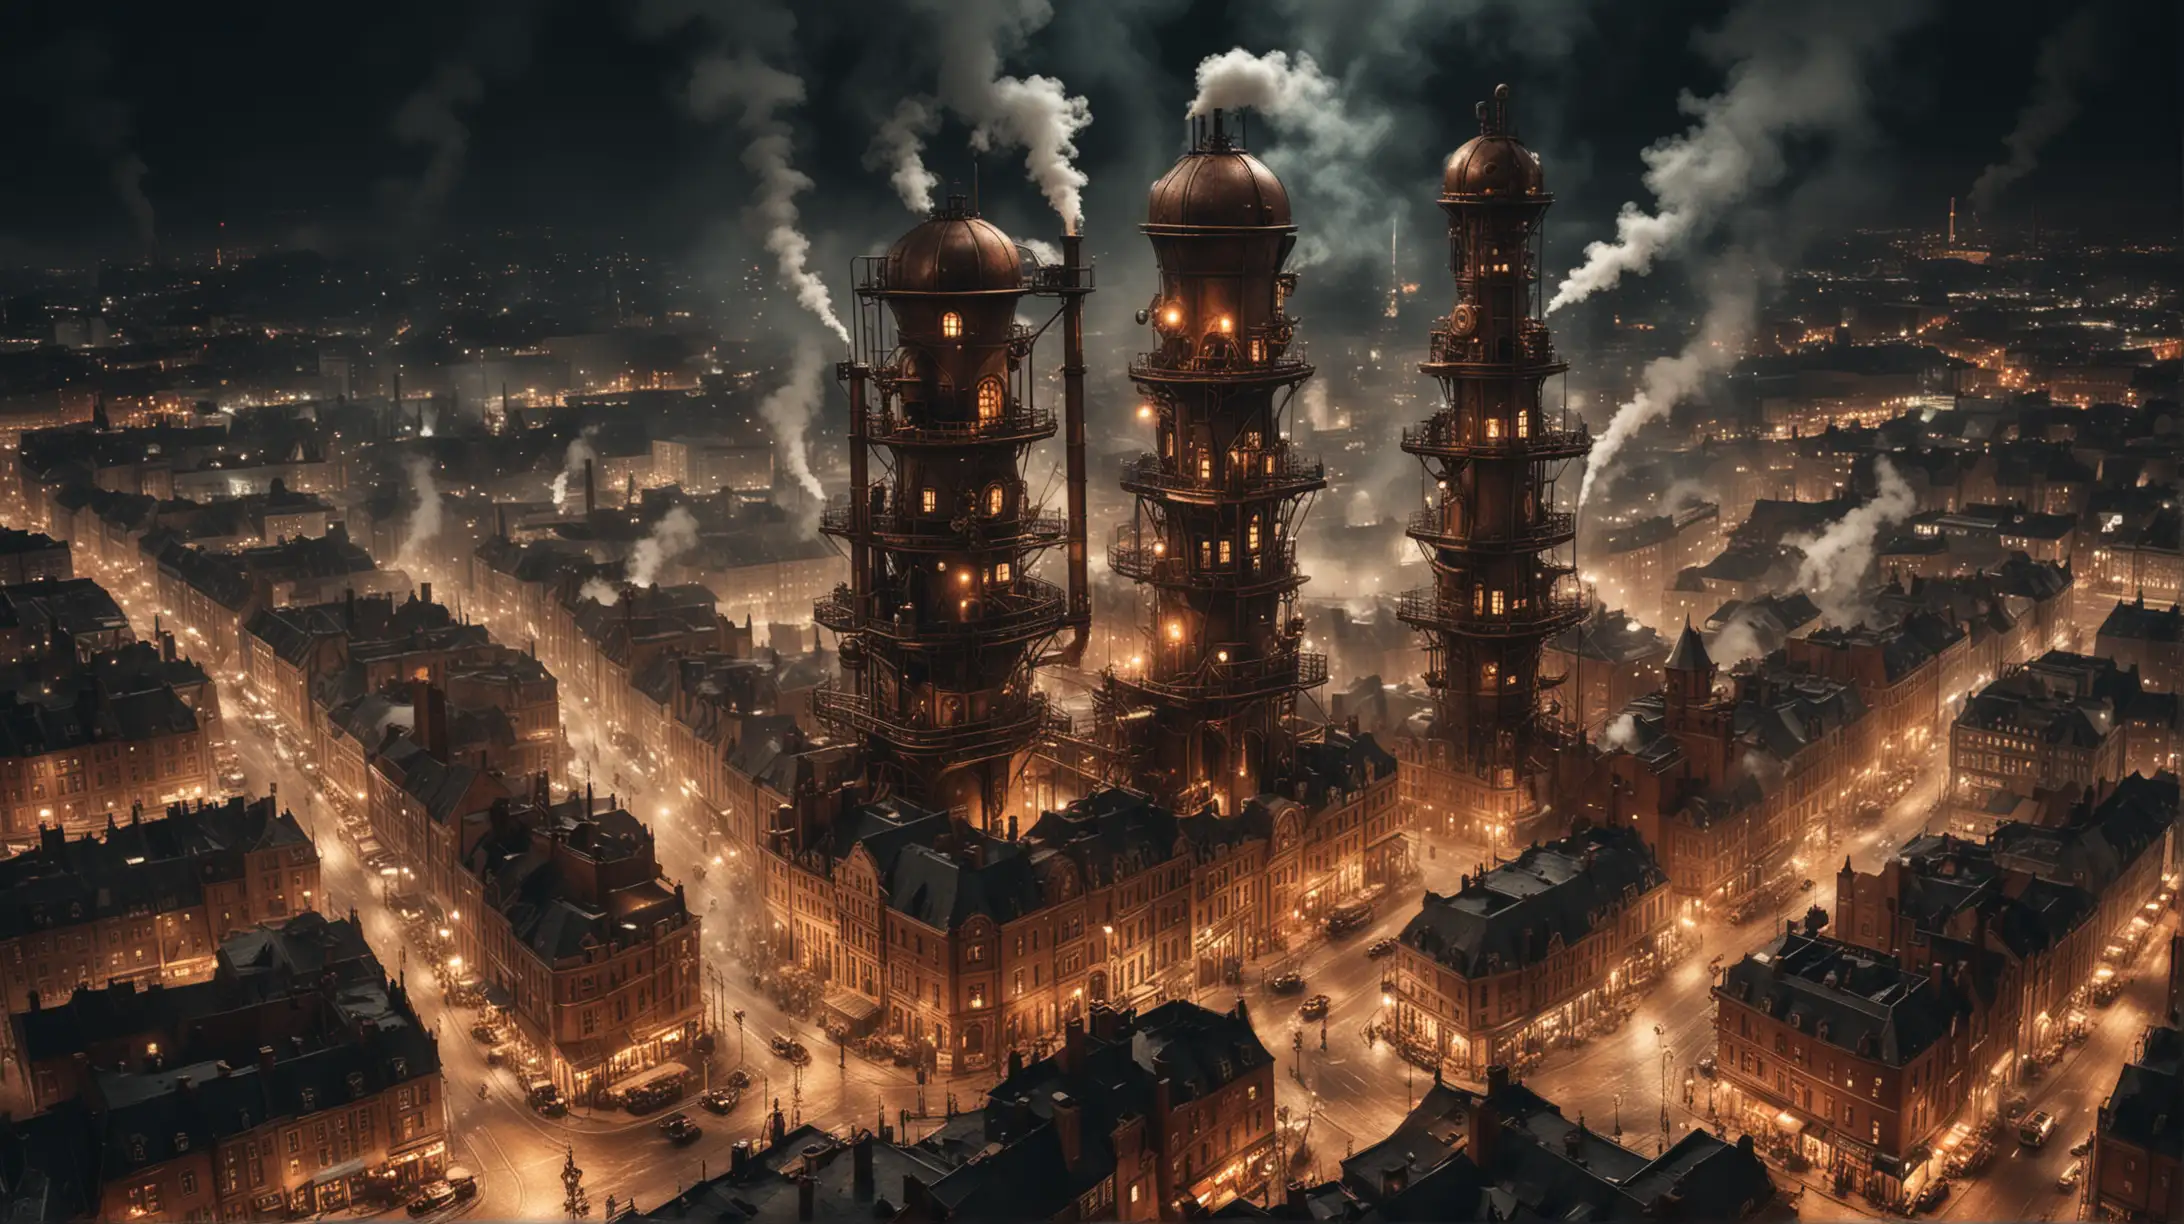 steampunk city by night, copper, brass, glass, much steam and smoke, distant view from a high tower